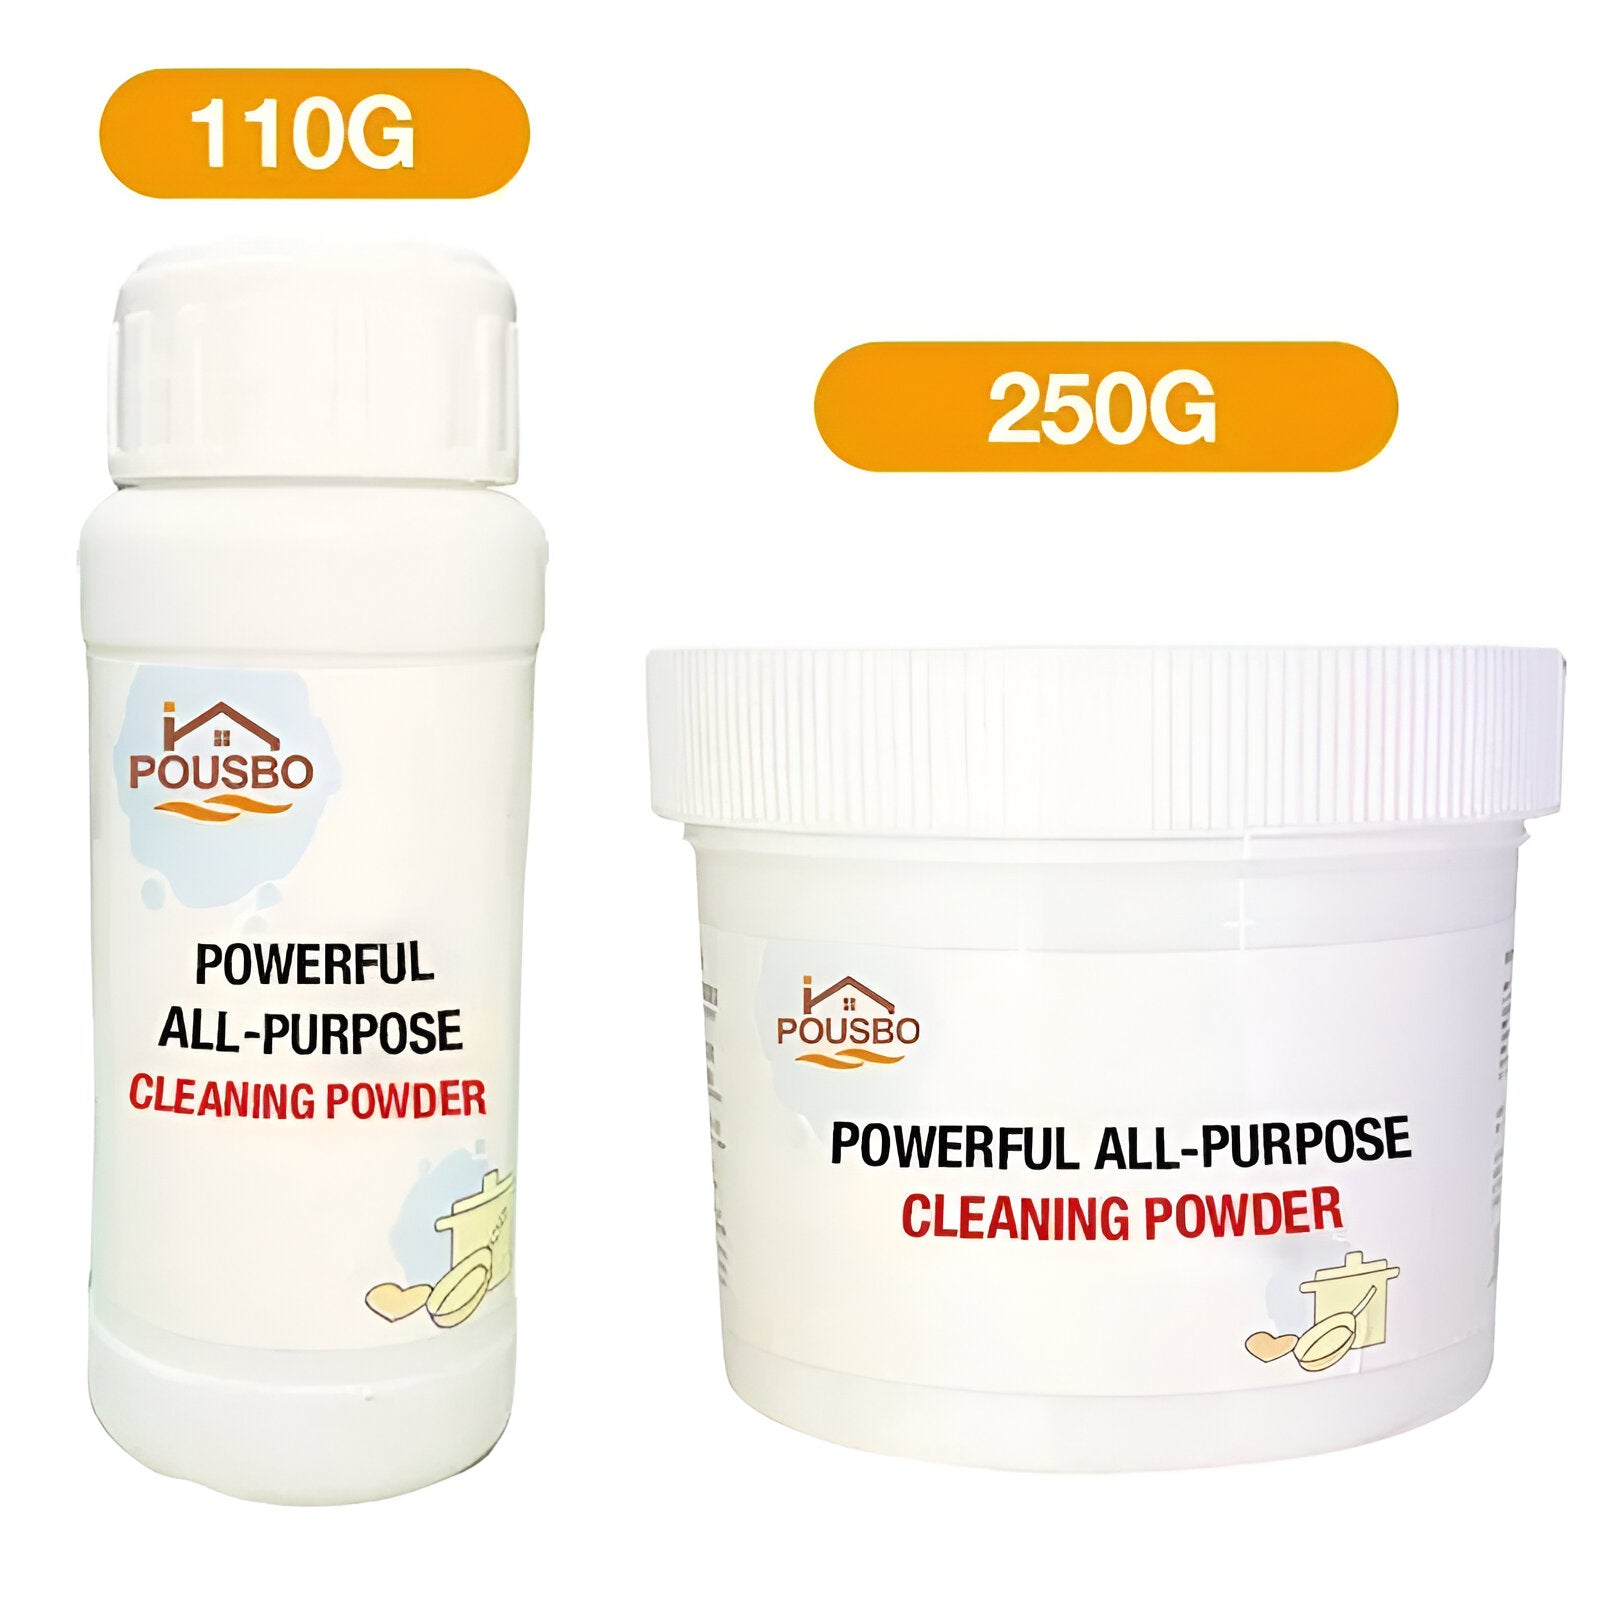 Powerful multi-purpose powder cleaner for kitchen